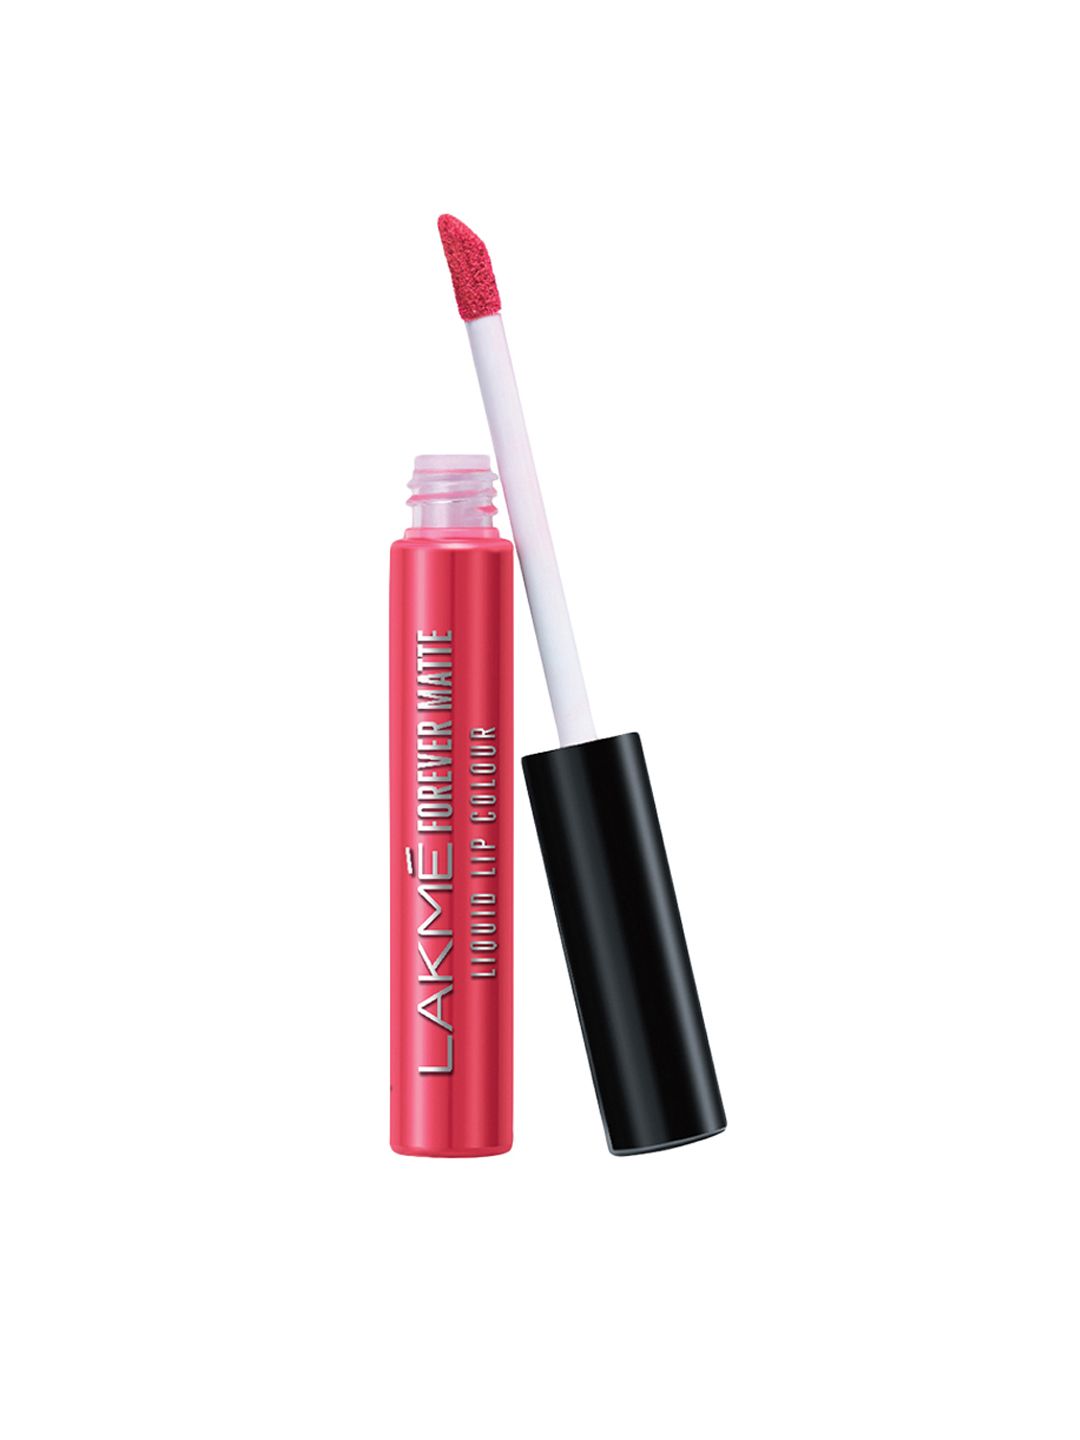 Lakme Forever Matte Liquid Lip Colour- 06 Coral Candy Price in India